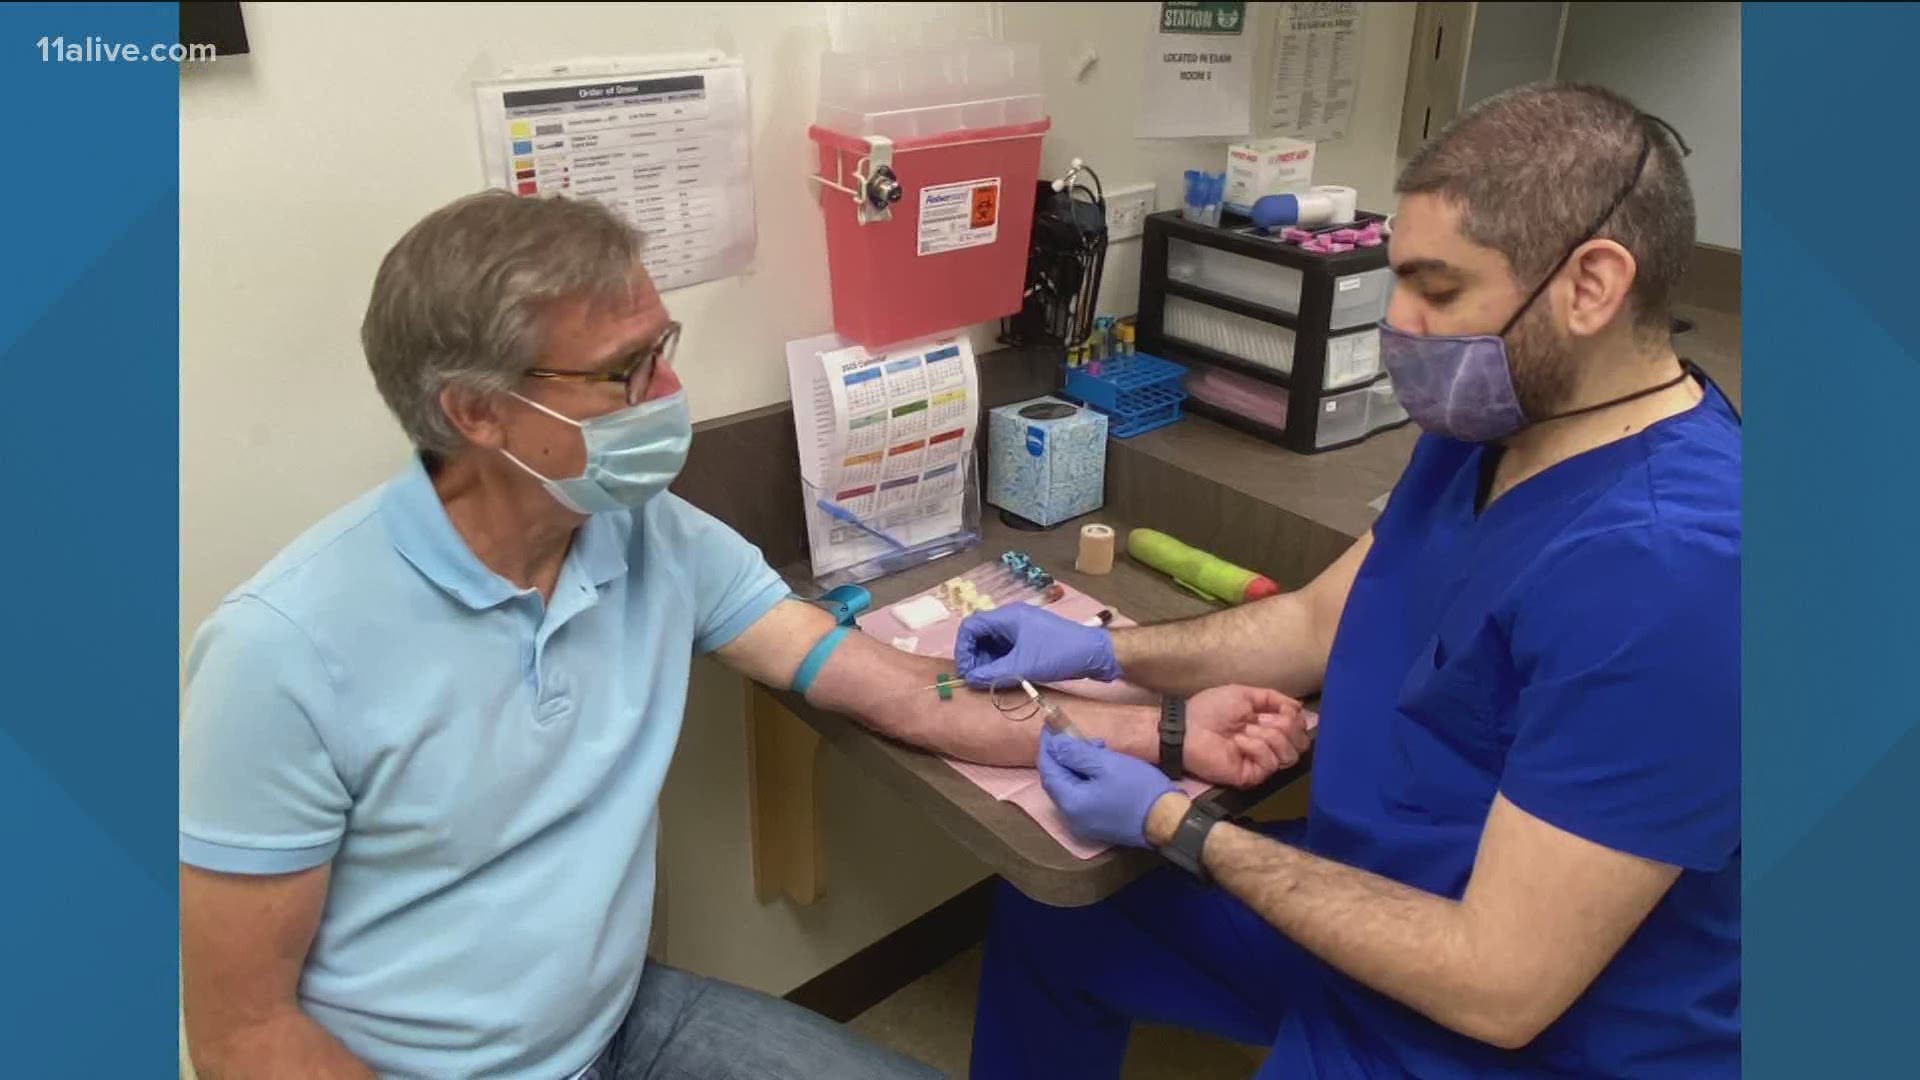 Norman Hulme is one of 60 patients participating in Emory’s COVID-19 vaccine trial.